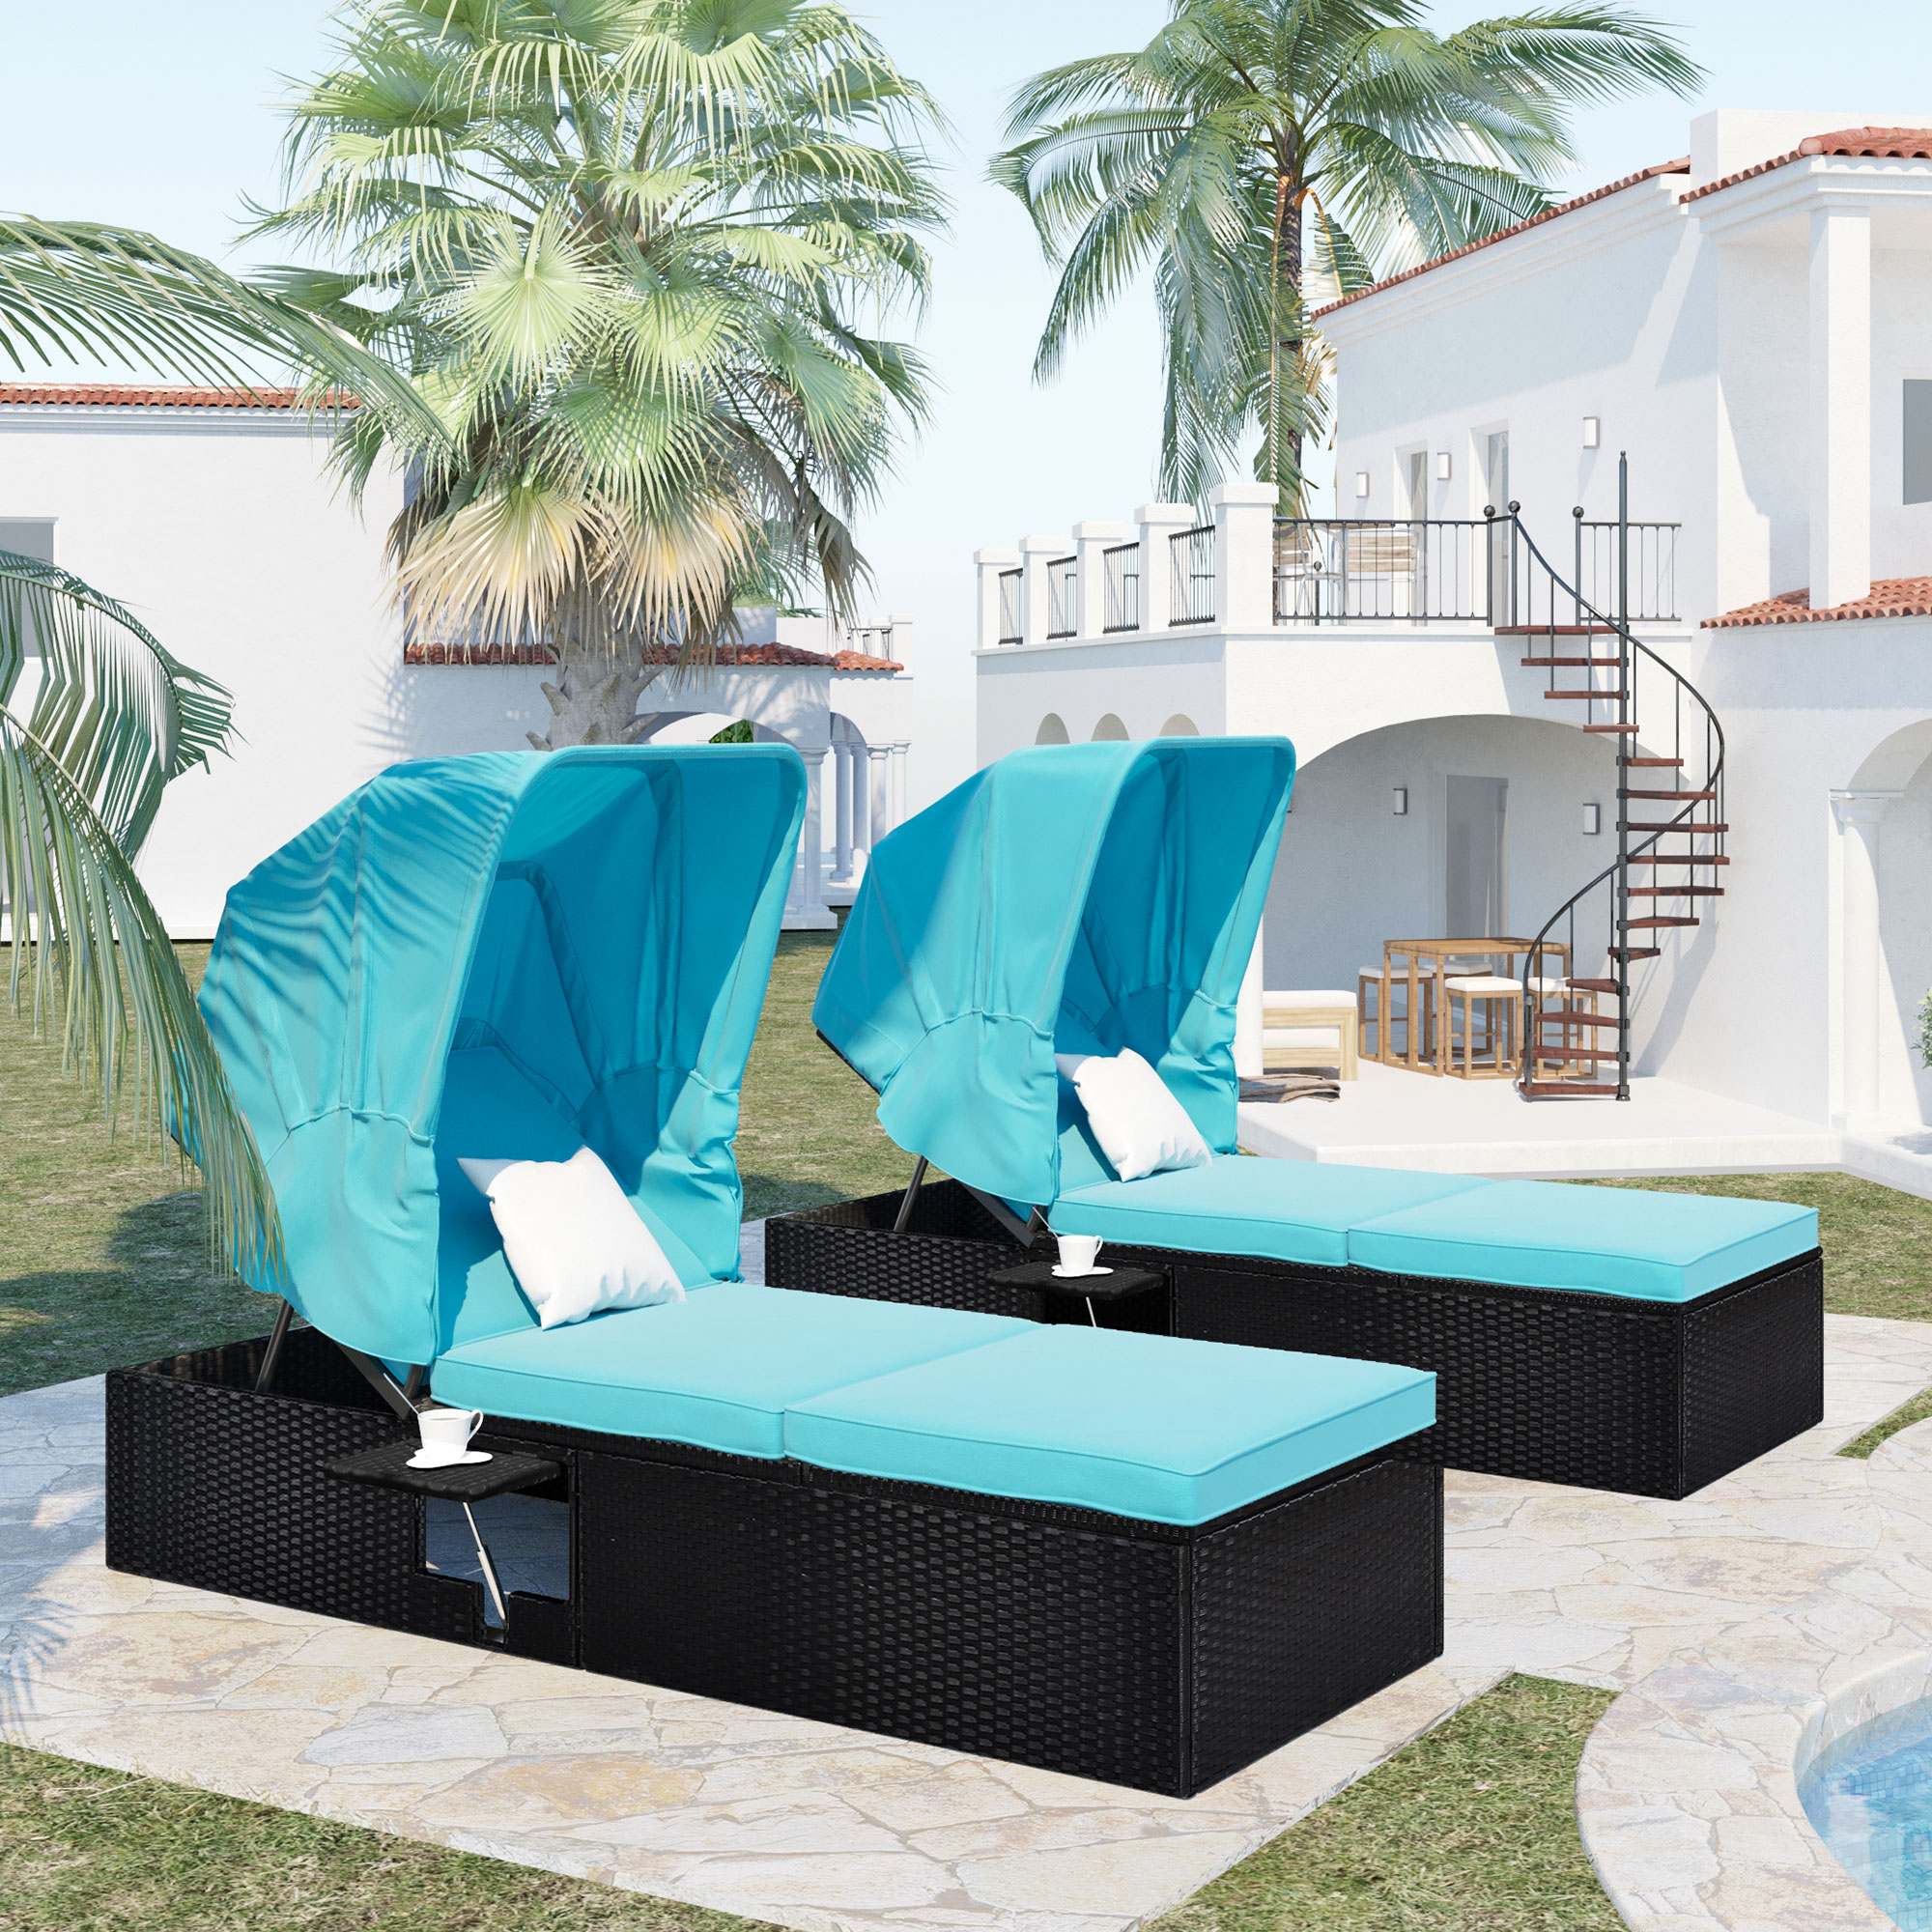 Outdoor PE Wicker Chaise Lounge, SYNGAR 2 Pieces Adjustable Reclining Chairs W/ Canopy and Cup Table, Patio Sun Lounger Set with Removable Cushion, Chaise Set for Poolside Garden Porch, Blue, D8760 - image 2 of 12